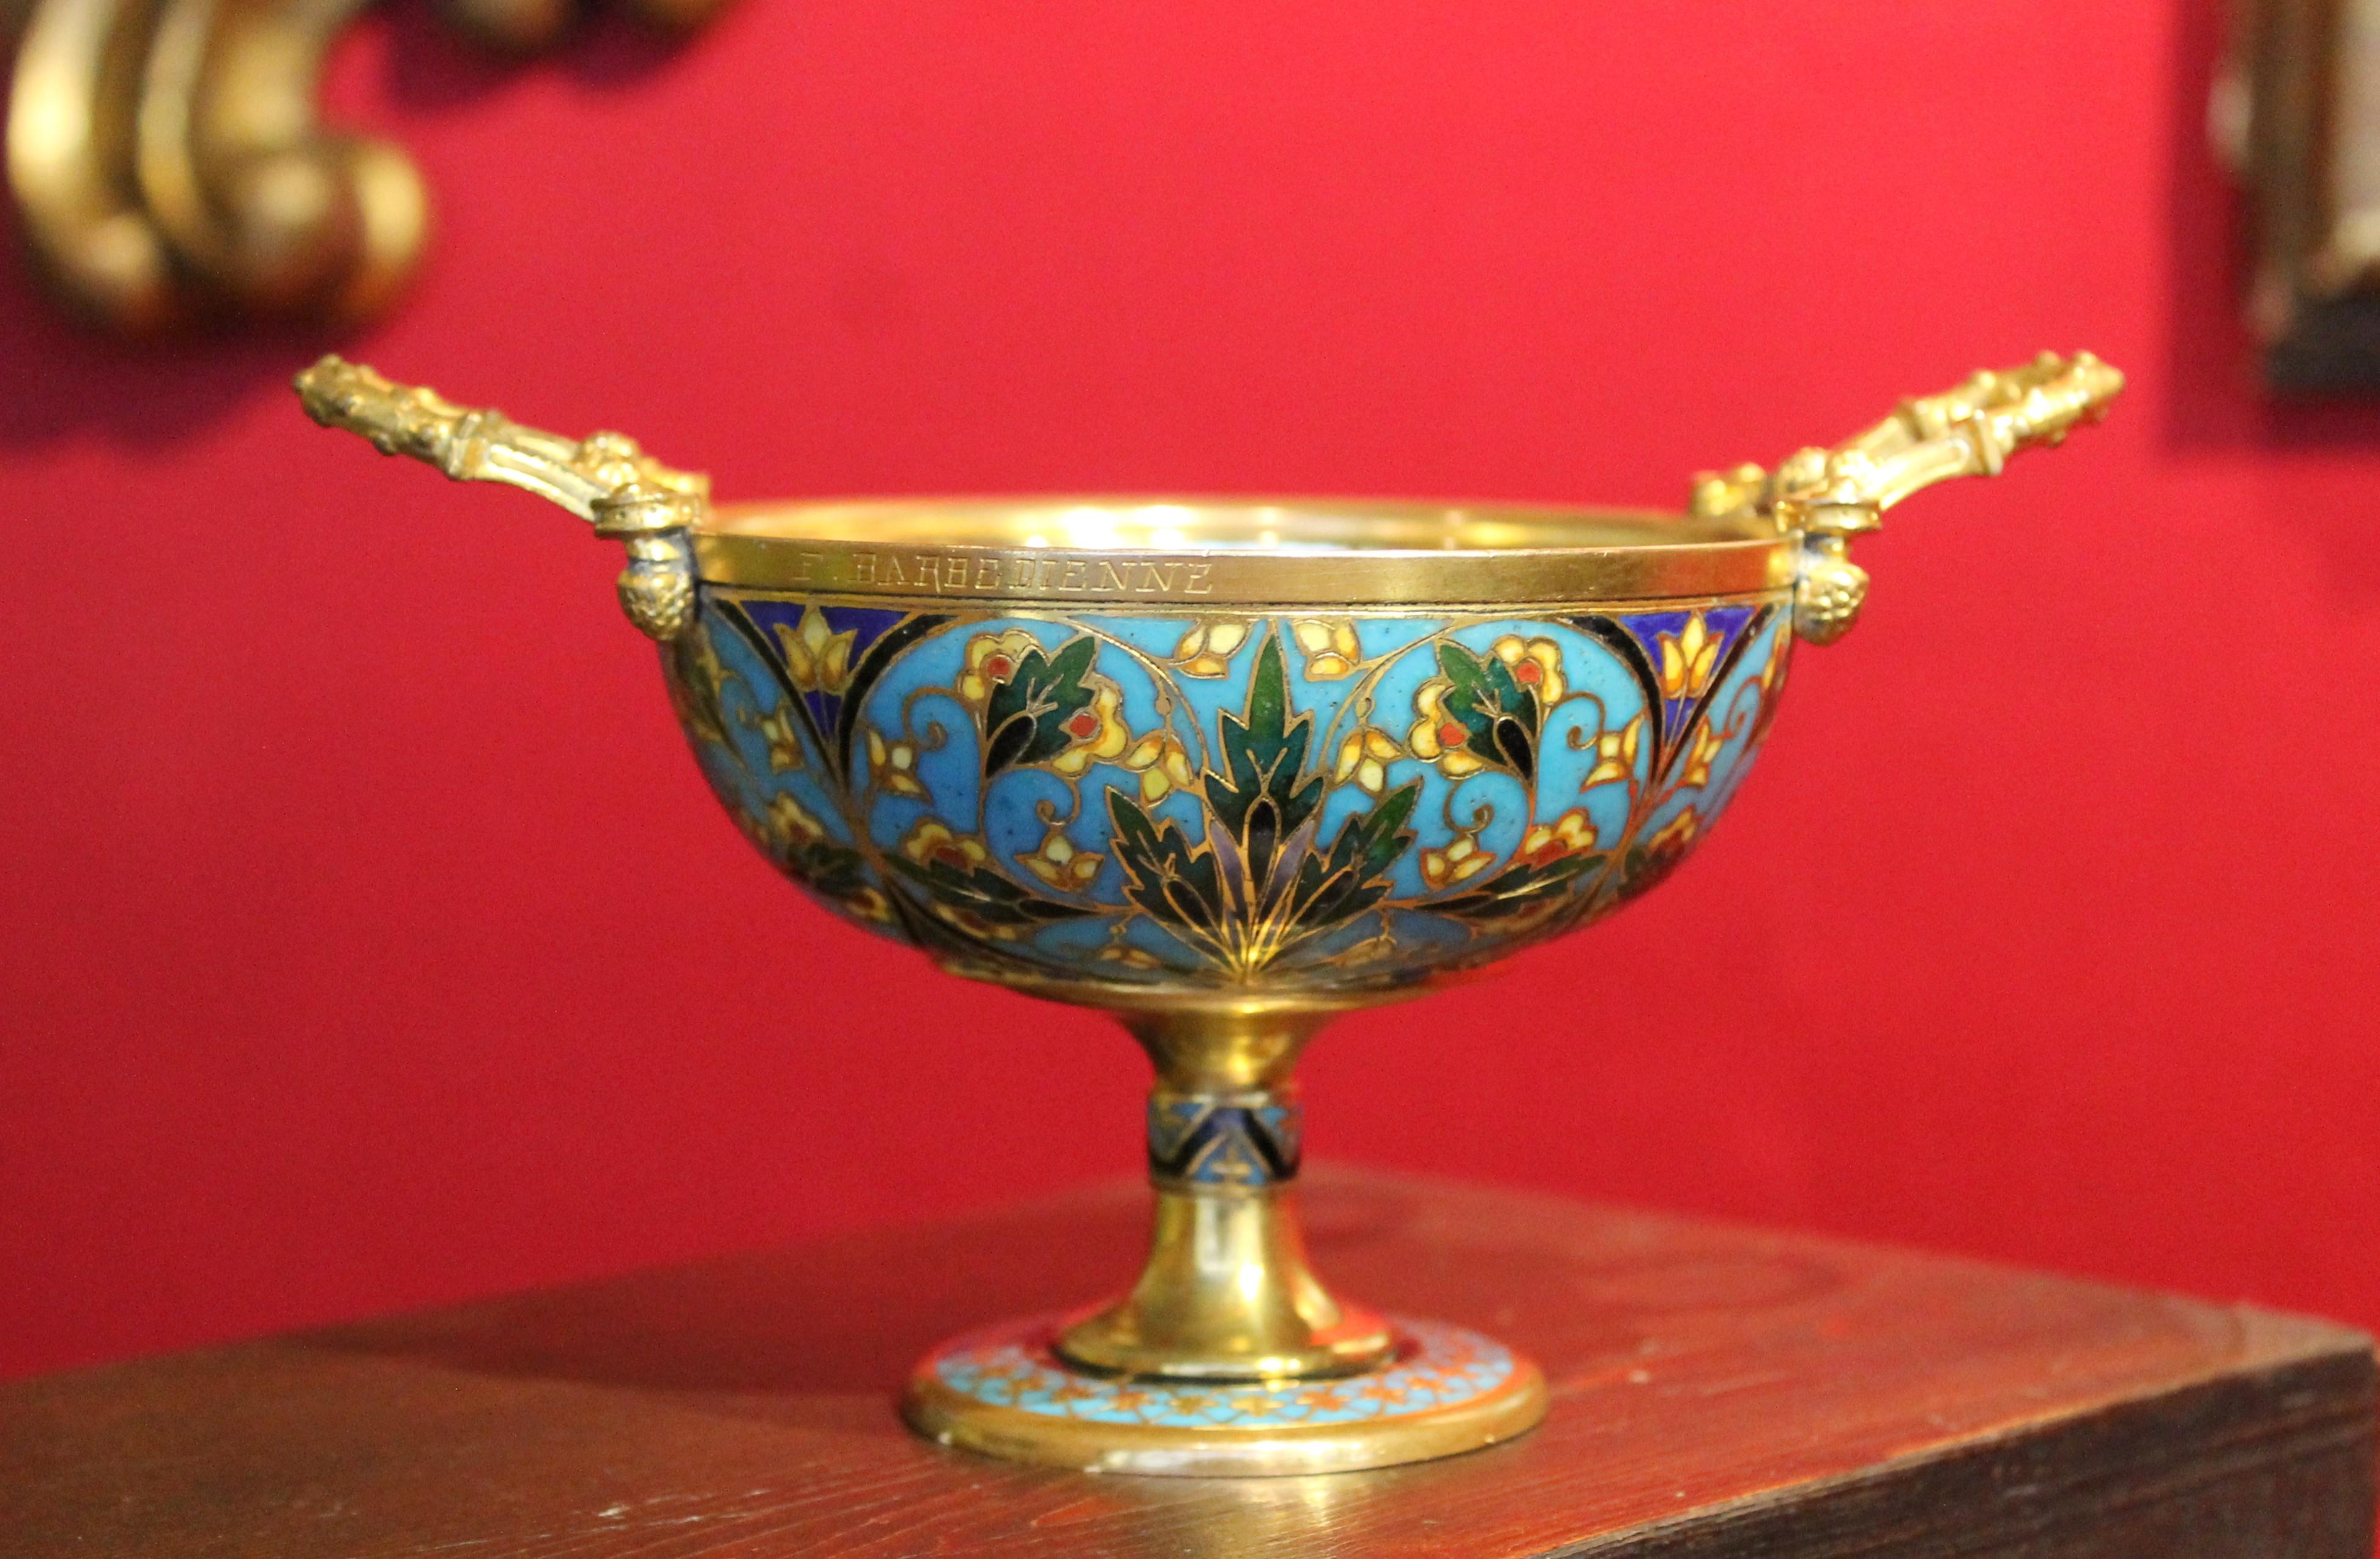 This French 19th Century antique lovely bronze and cloisonnè enamel tazza or cup with handles is an artwork made by Ferdinand Barbedienne (1810–1892). This Napoleon III period little and refined bowl is an oriental style decorative or vitrine object